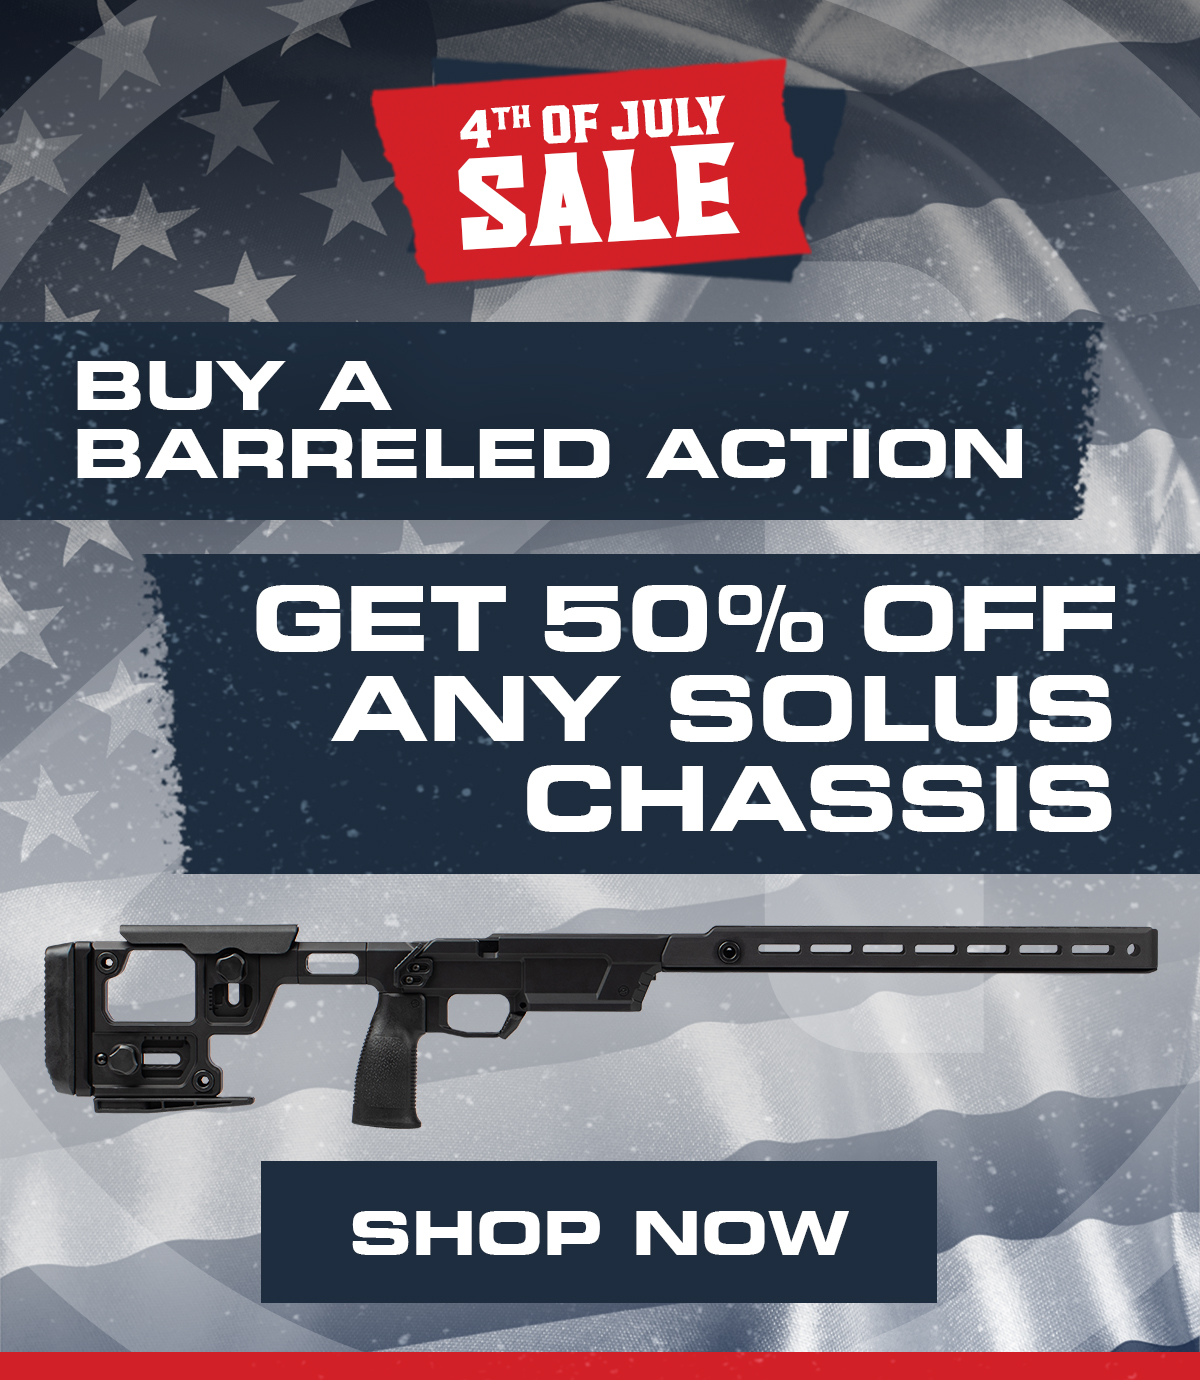 4TH OF JULY SALE | BUY A BARRELED ACTION, GET 50% OFF ANY SOLUS CHASSIS | SHOP NOW